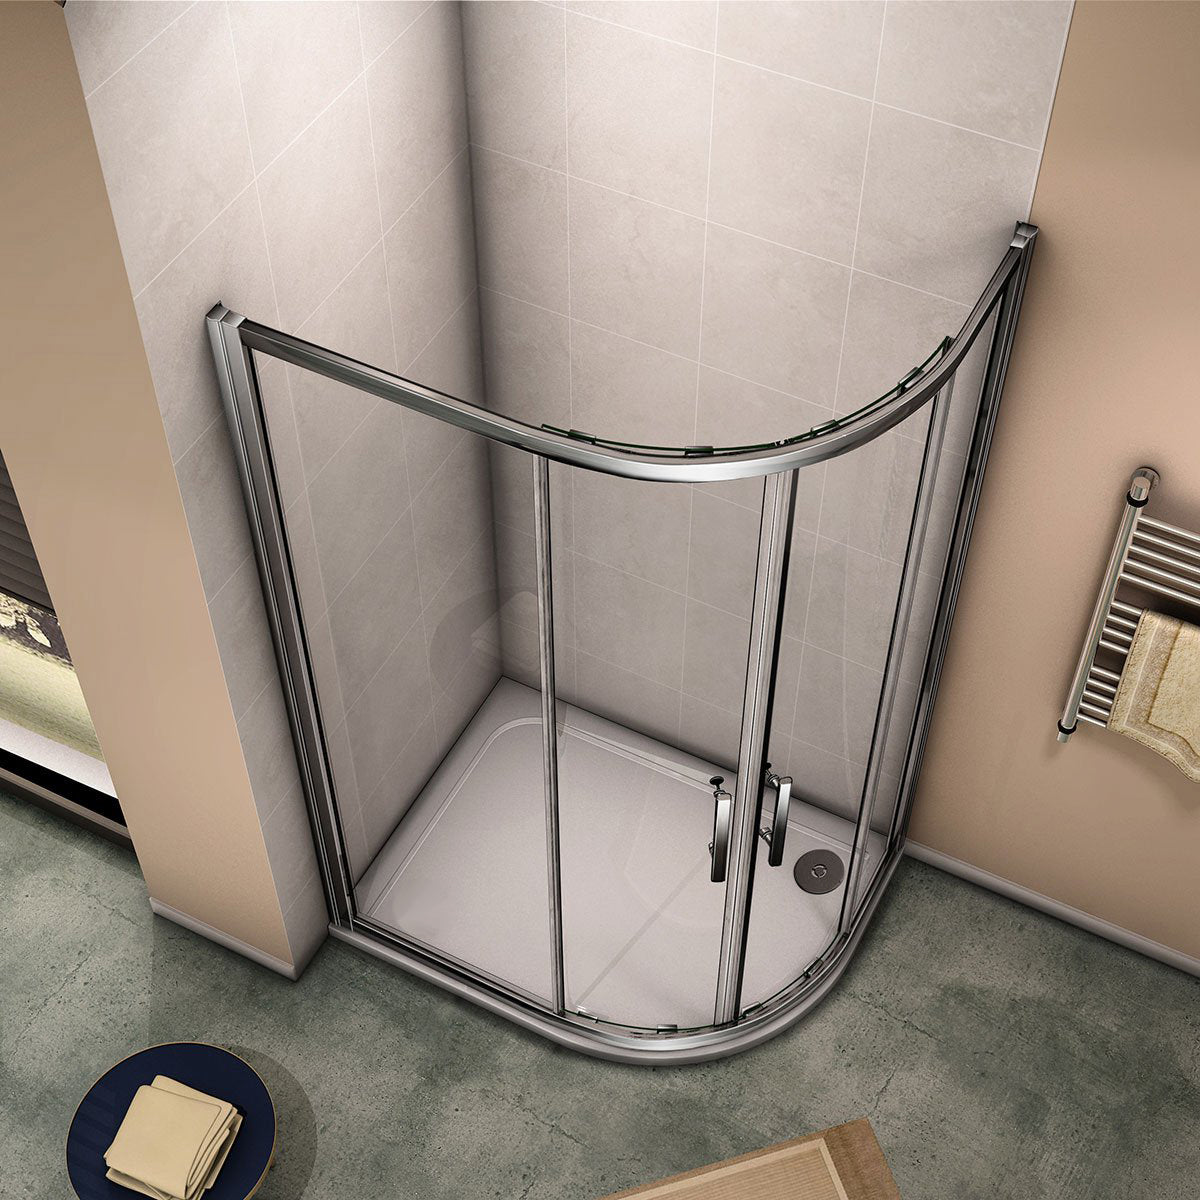 6mm easy clean glass quadrant shower enclosure, No tray,clearance